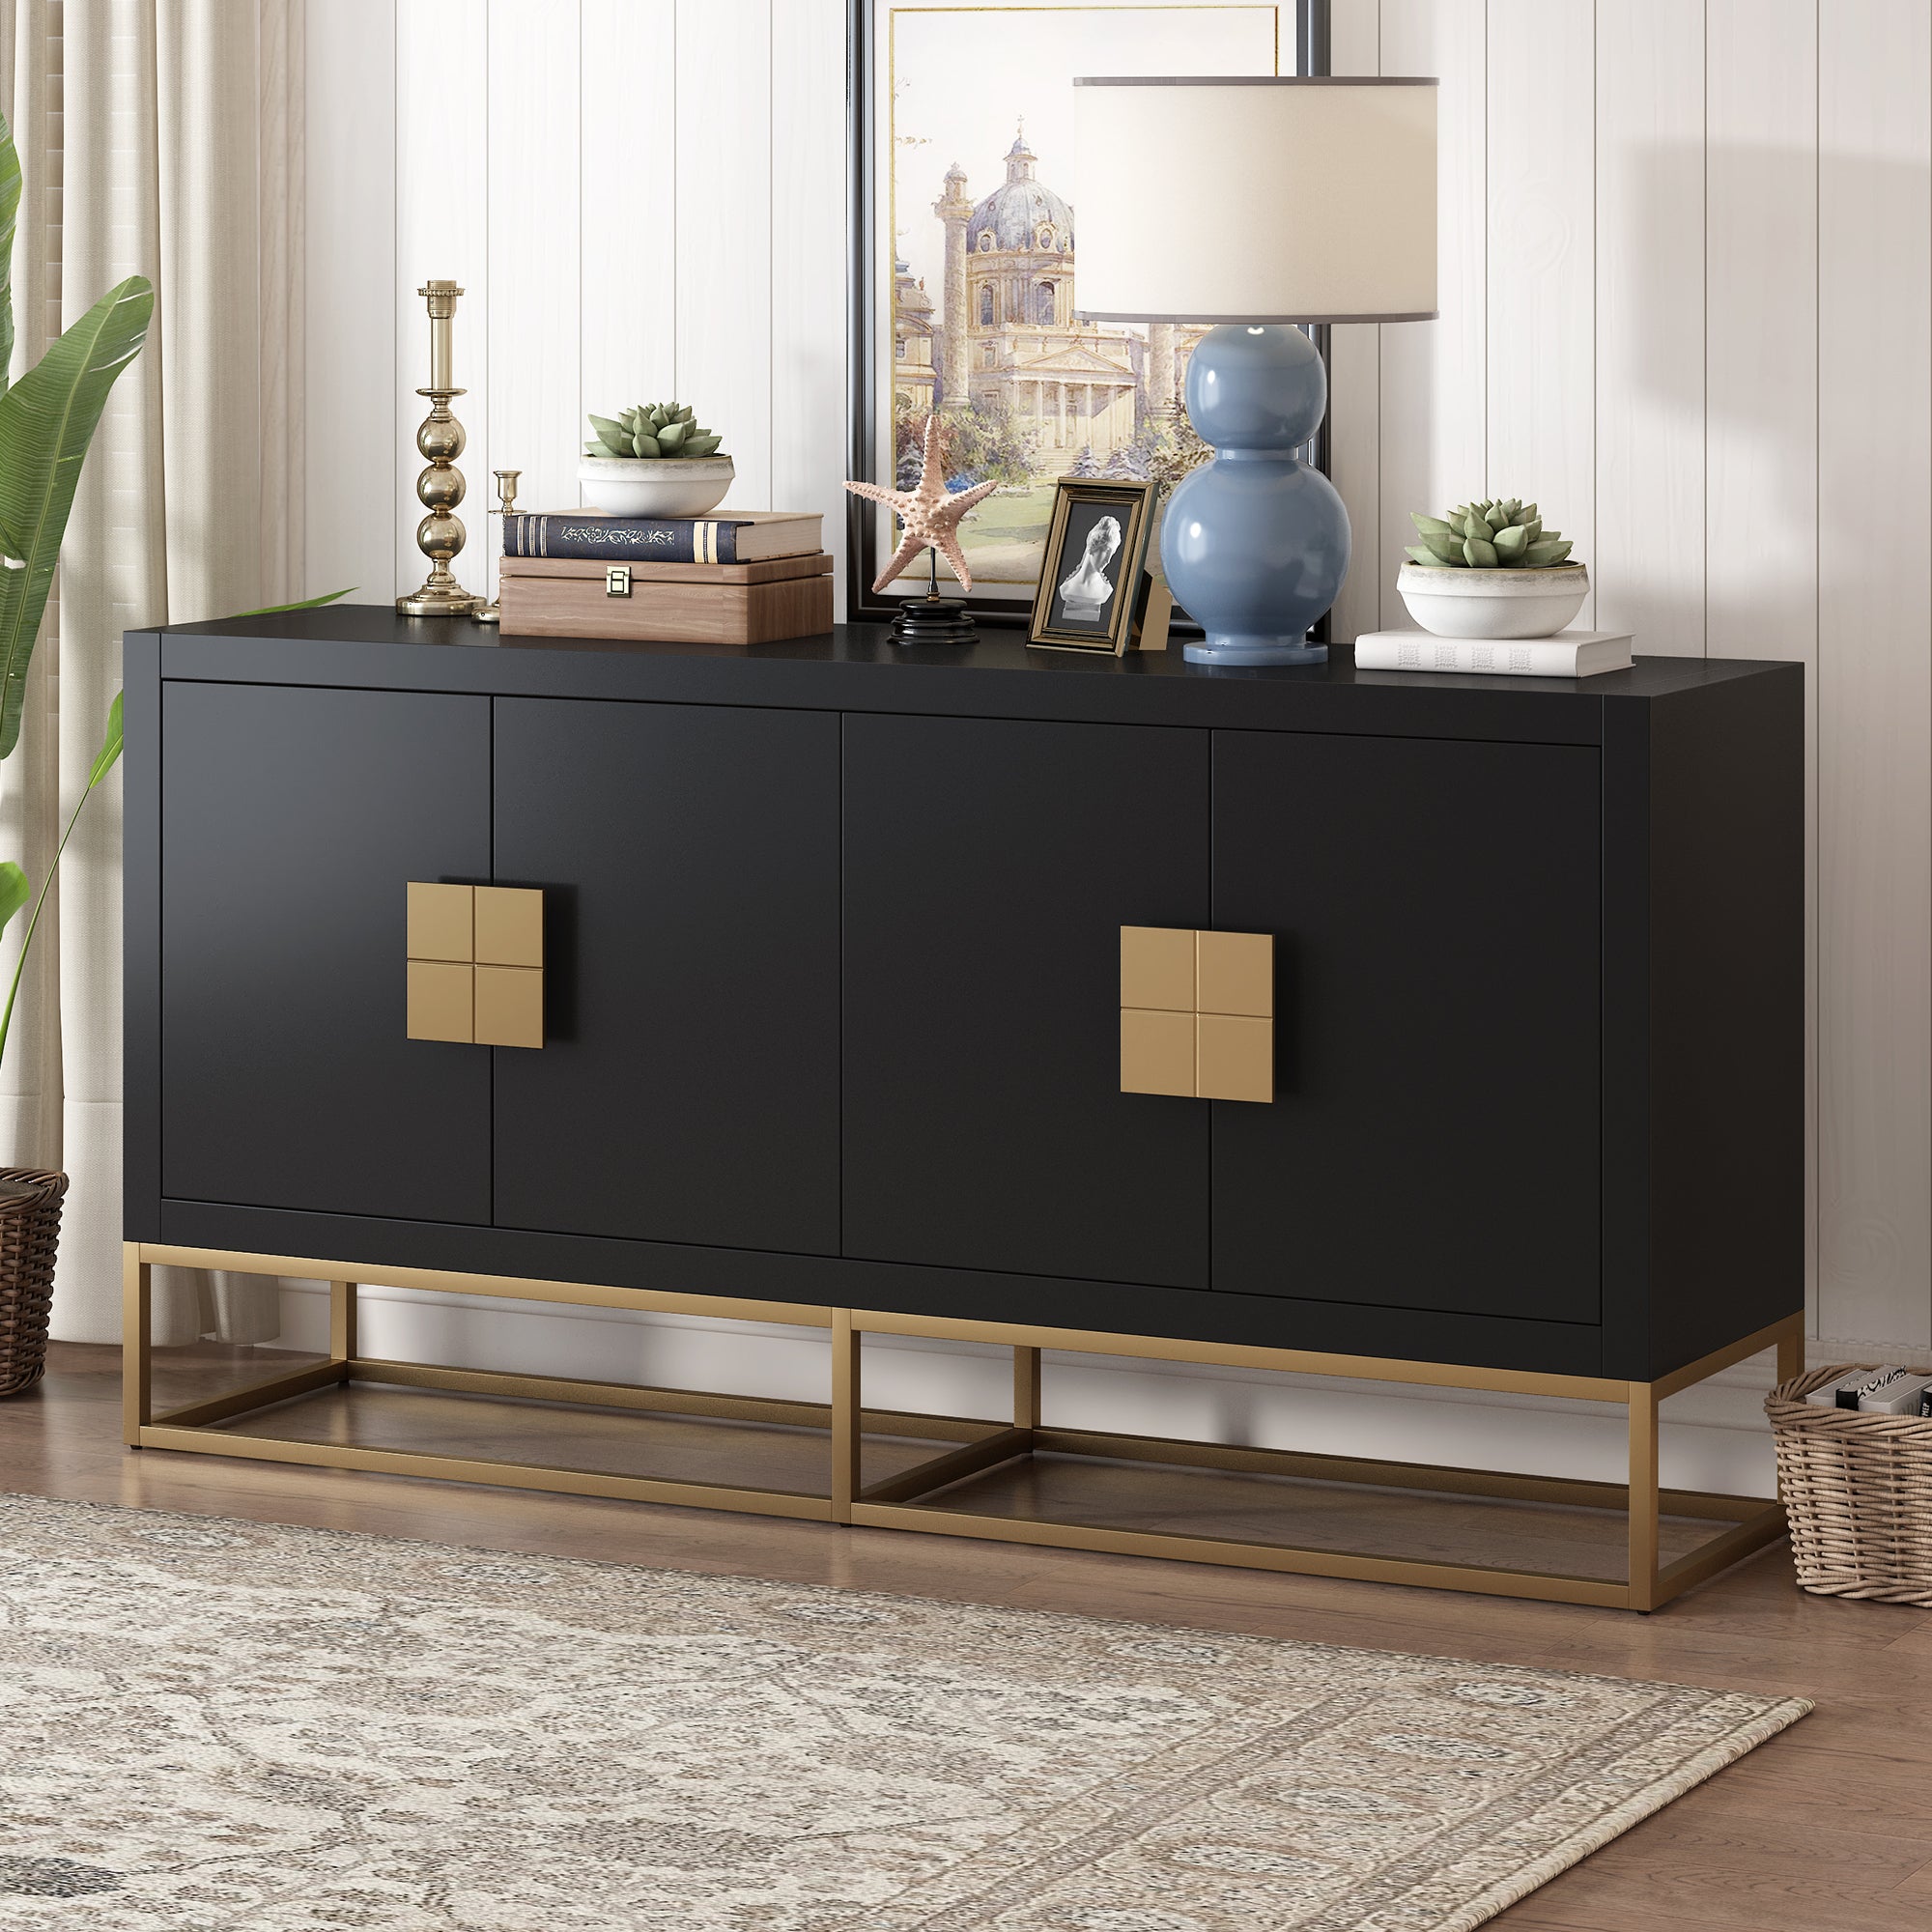 🆓🚛 Light Luxury Designed Cabinet With Unique Support Legs and Adjustable Shelves, Suitable for Living Rooms, Corridors, and Study Rooms.